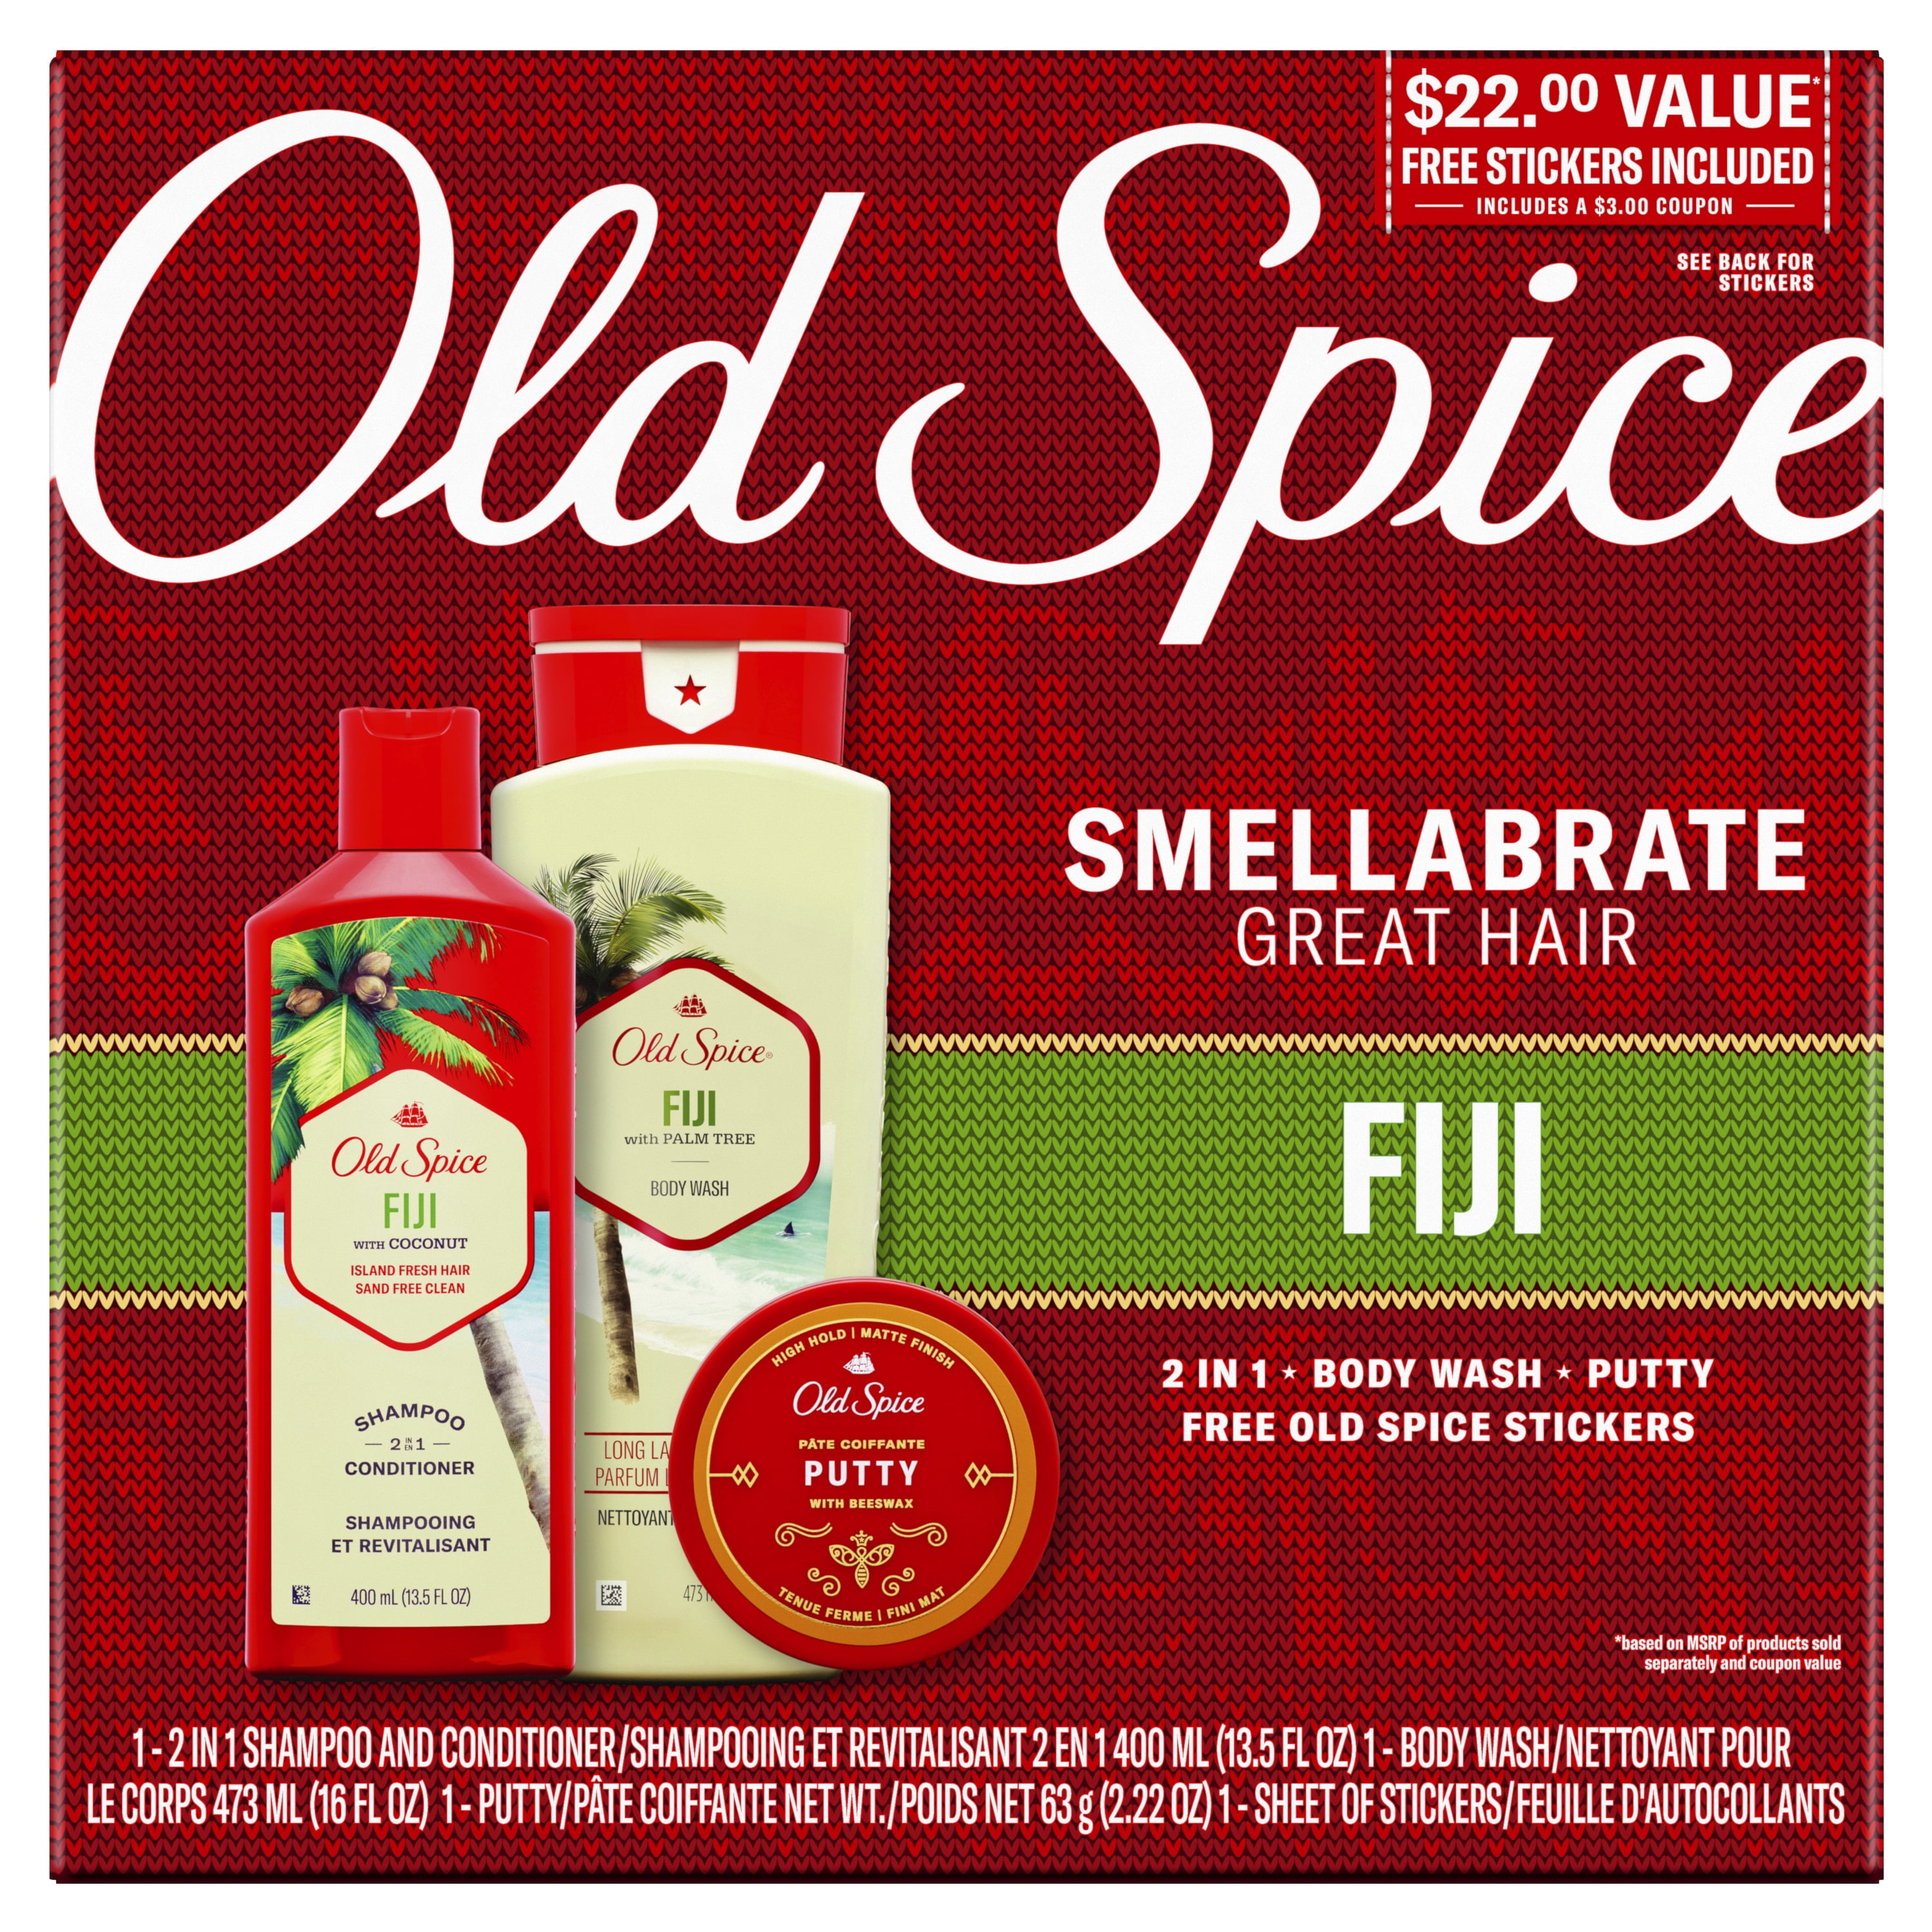 ($22 VALUE) Old Spice Hair Style Fiji Holiday Pack With 2 in 1 Shampoo and Conditioner, Body Wash, Hair Pomade and Sheet of Stickers